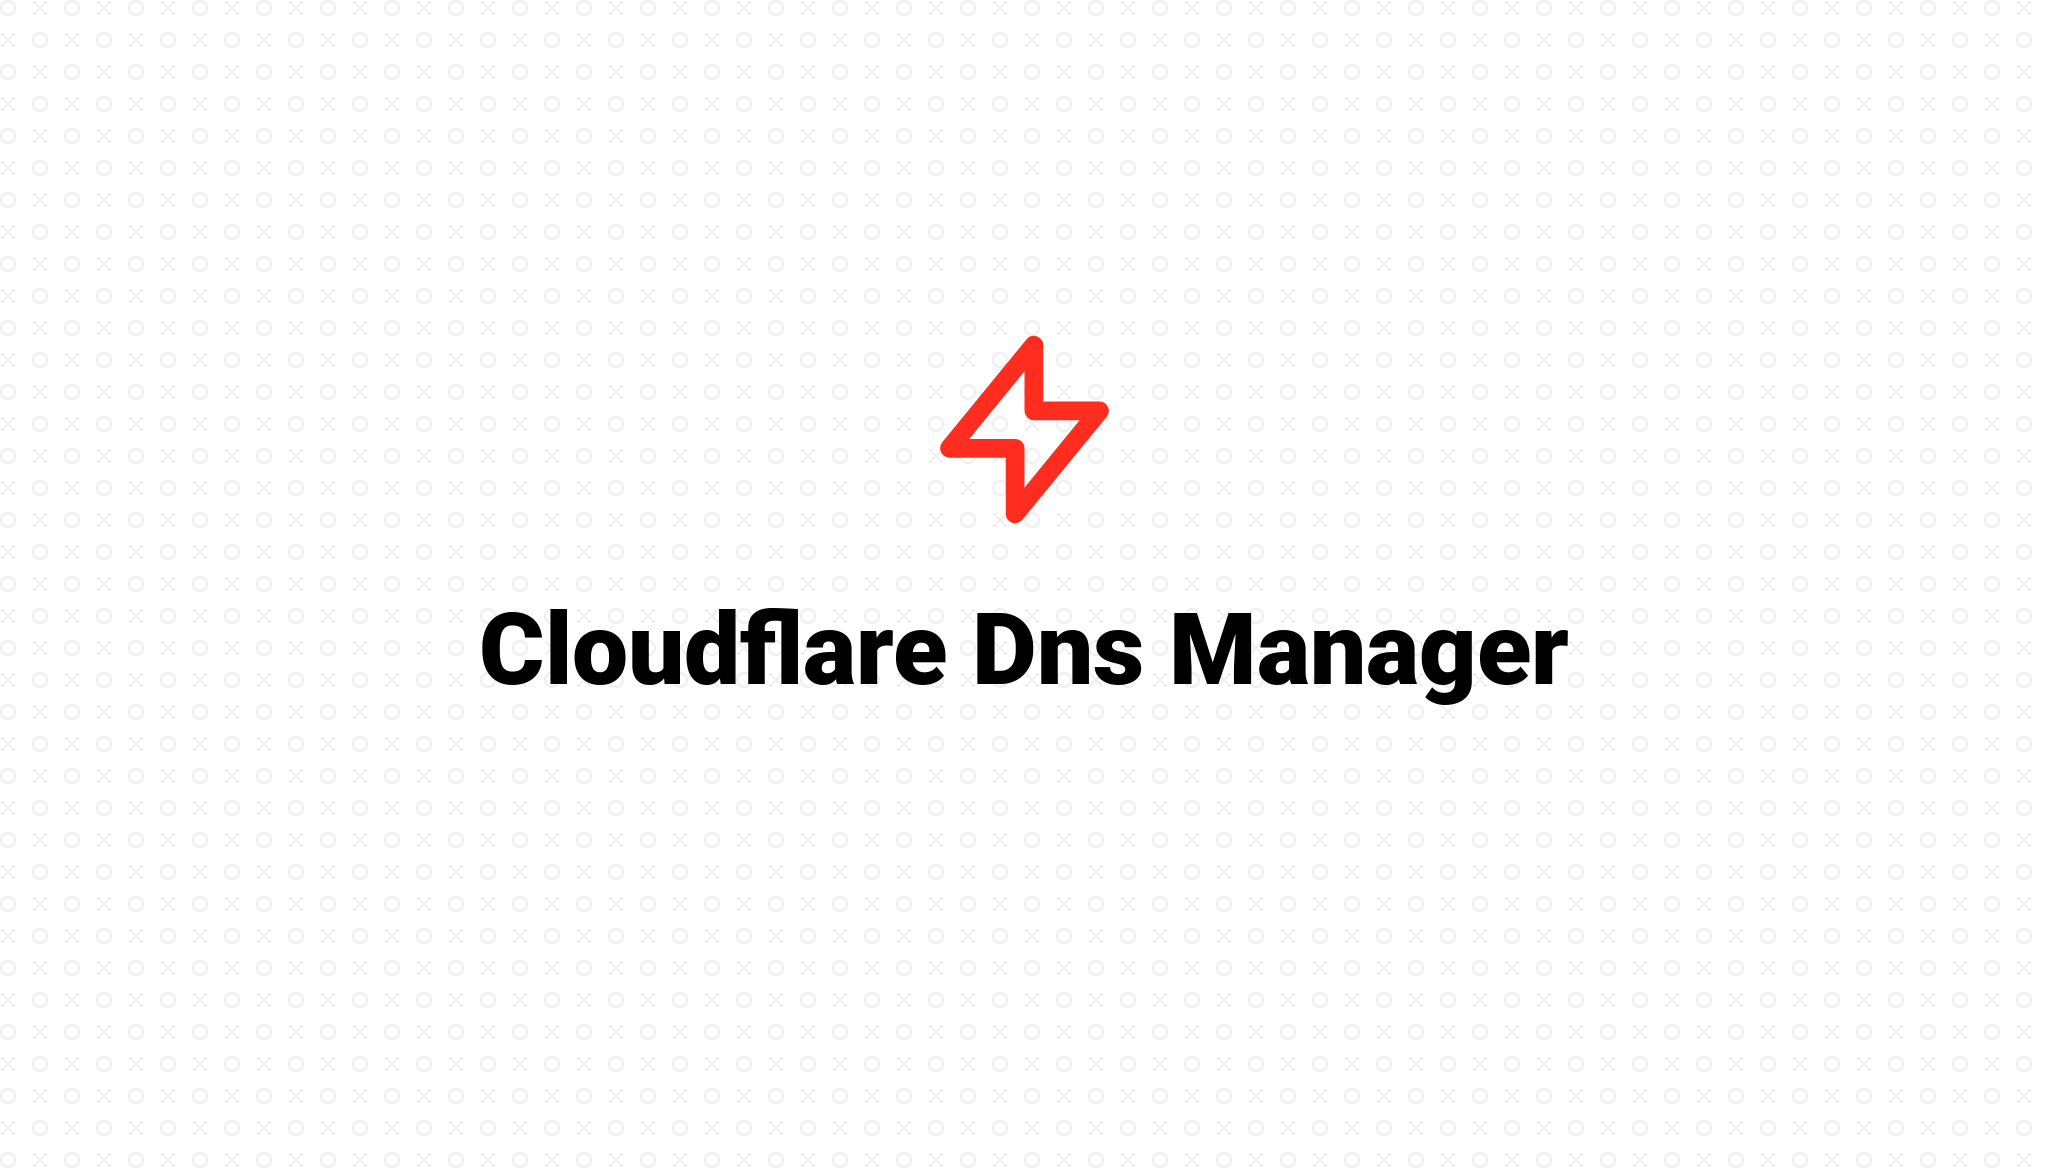 Cloudflare Dns Manager